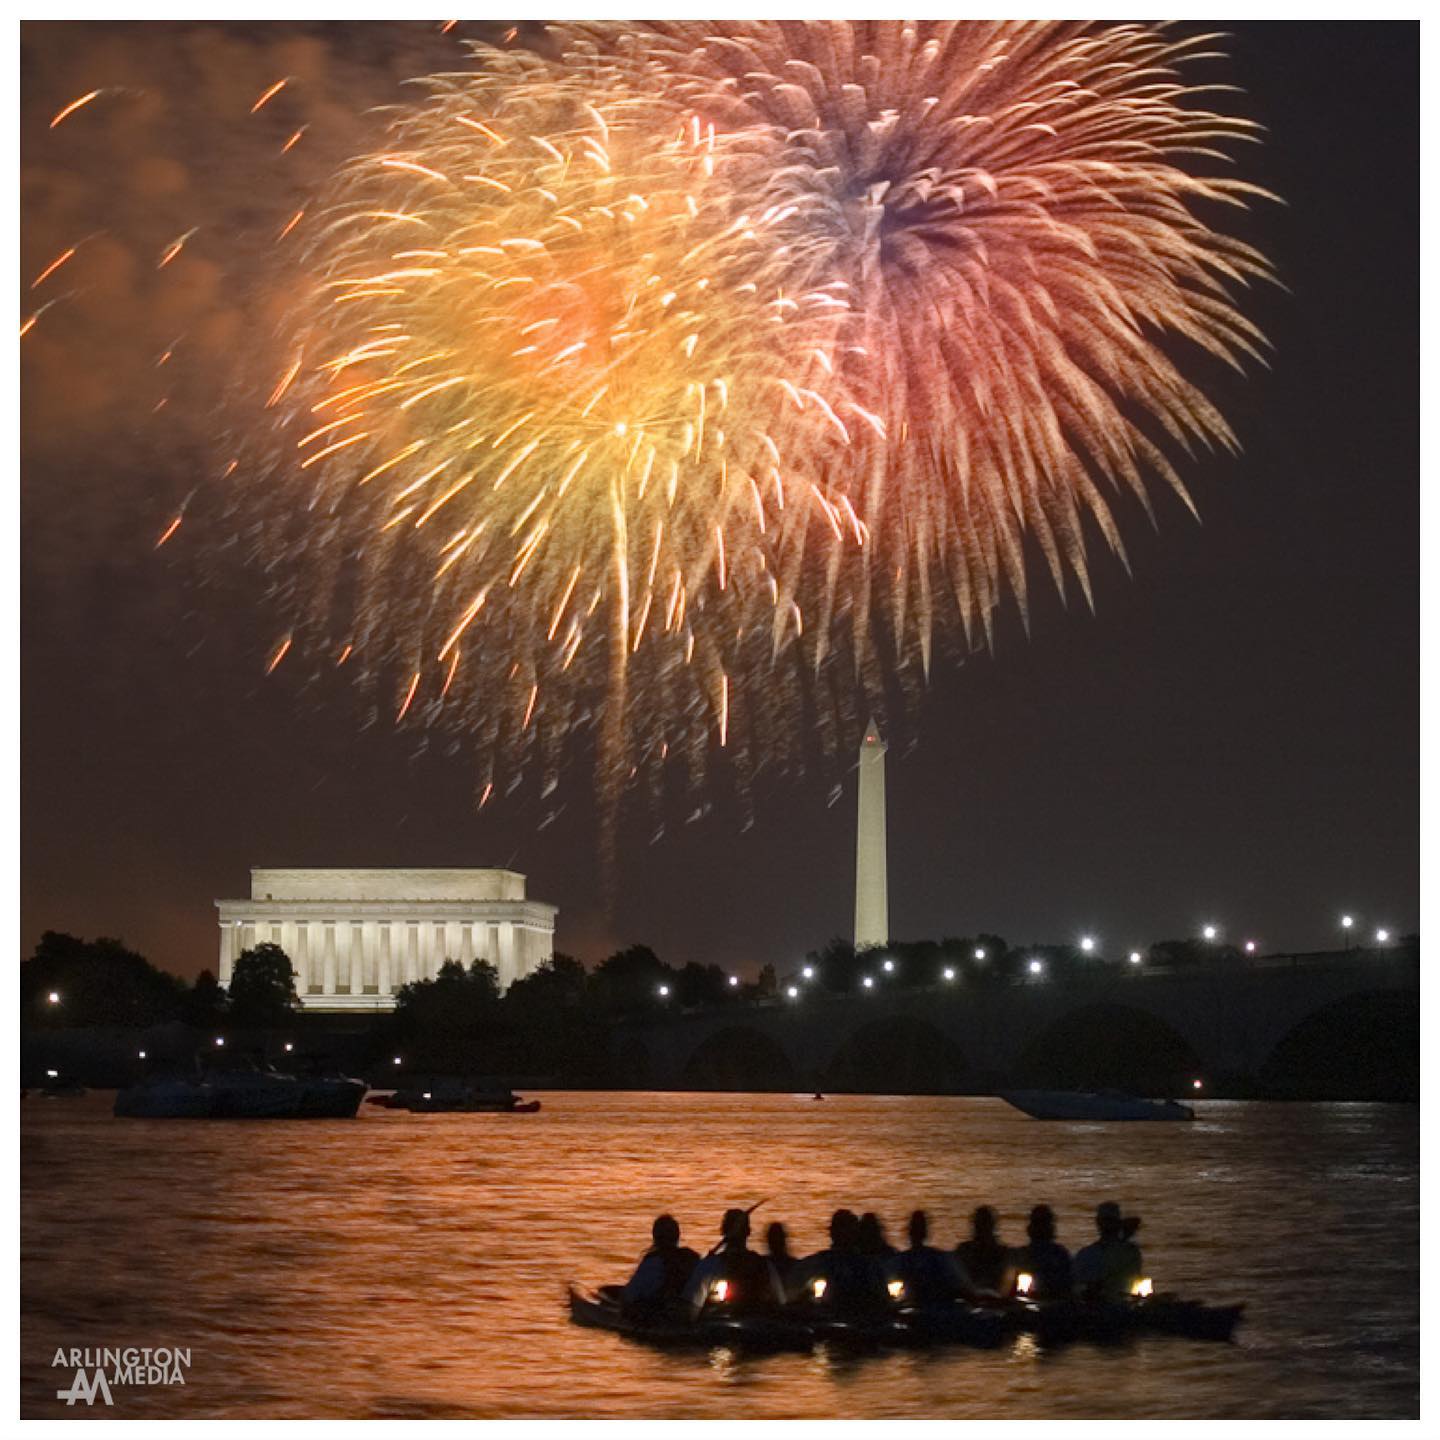 Happy 4th of July to you and your loved ones from the staff at Arlington Media.